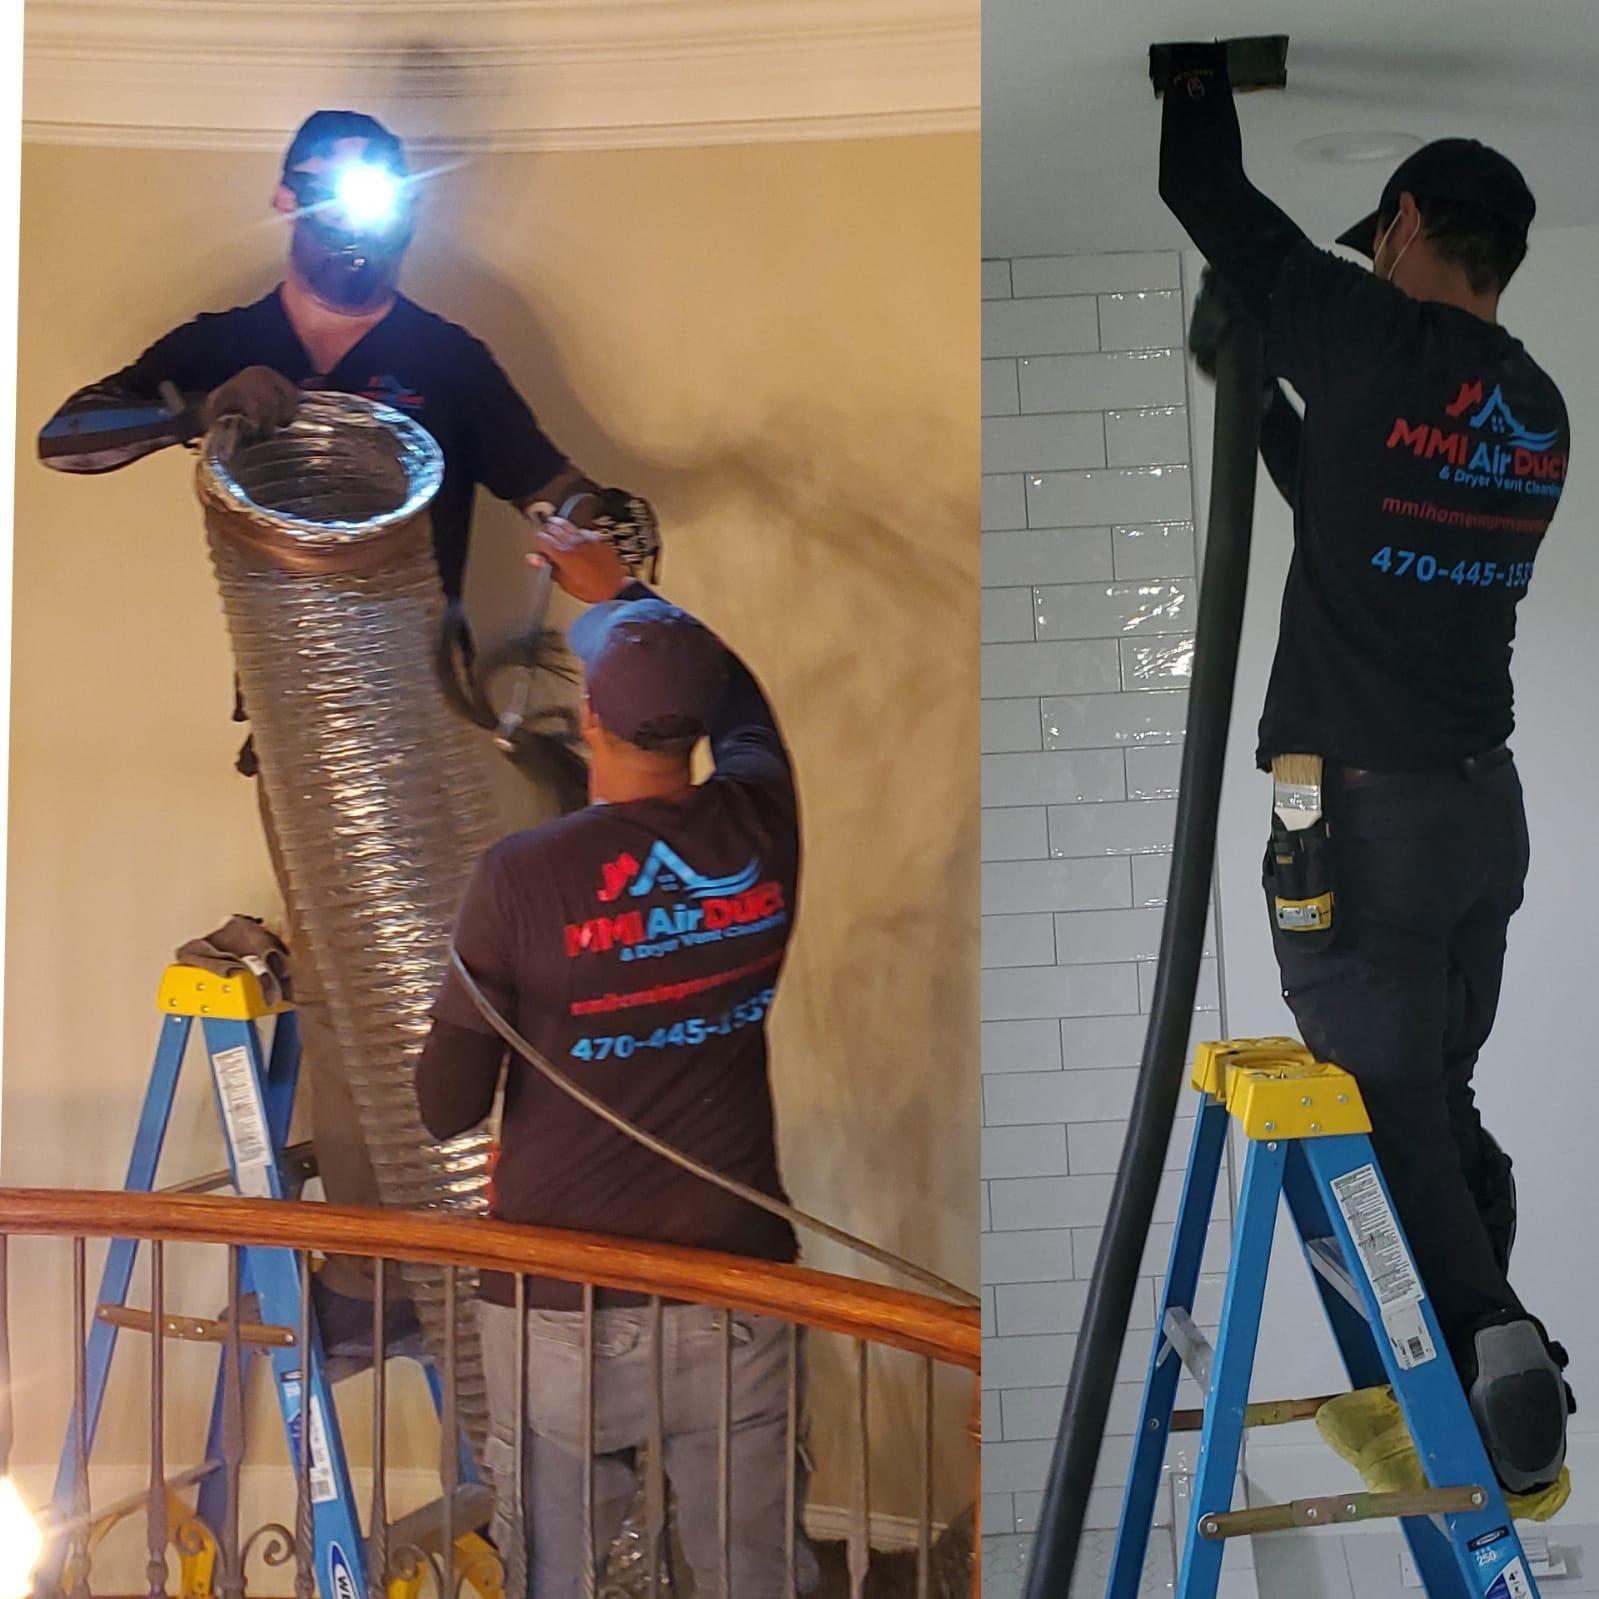 MMI Air Duct Cleaning Service Provider in GA